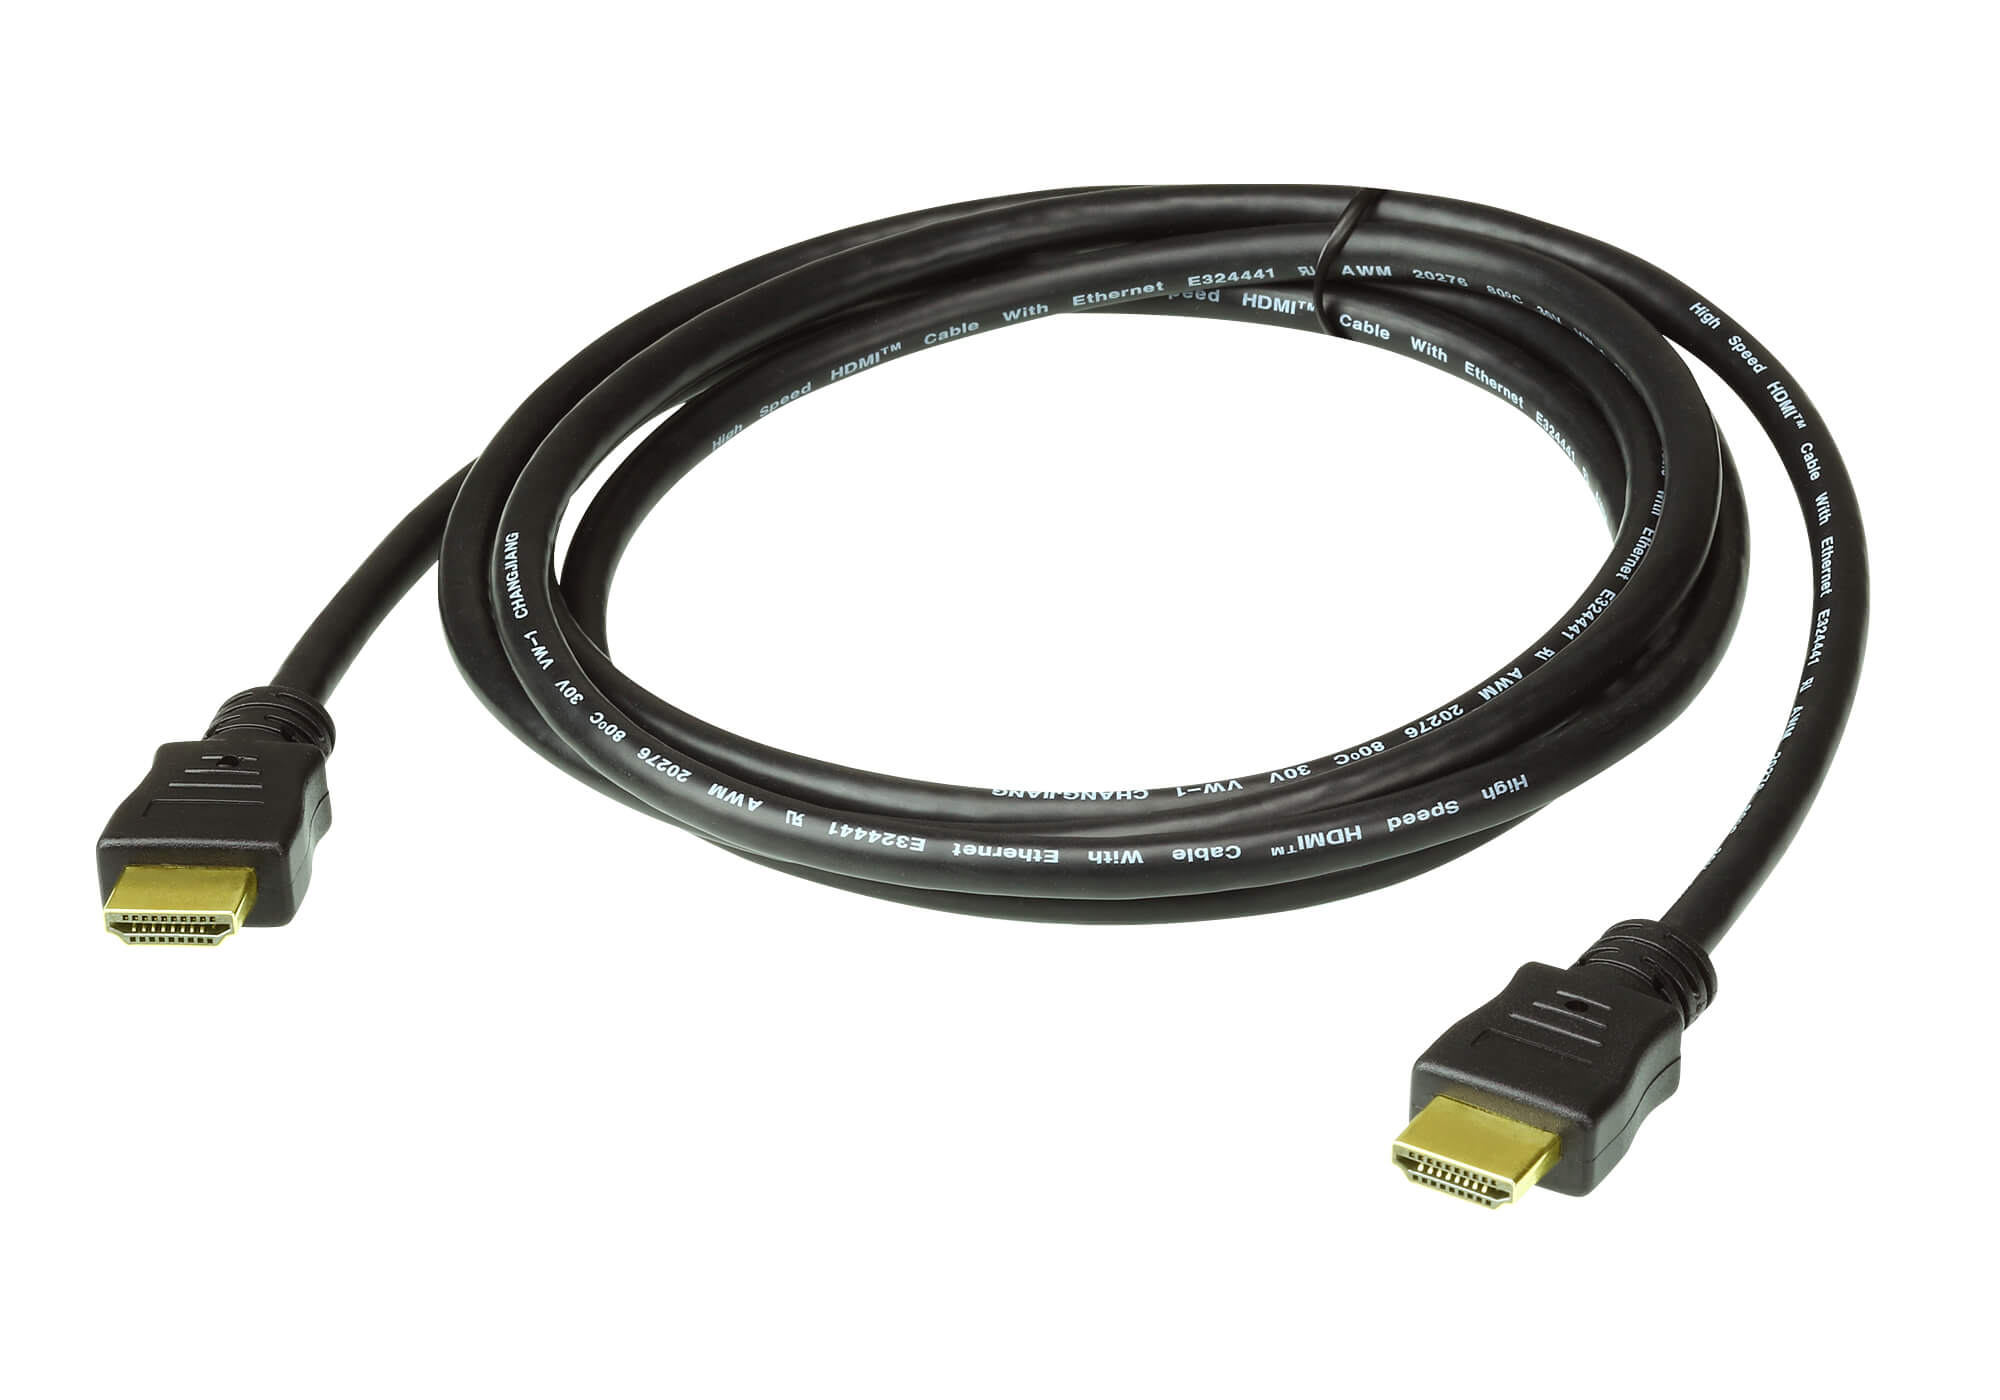 Aten 10M High Speed HDMI Cable with Ethernet. Support 4K UHD DCI, up to 4096 x 2160 @ 30Hz